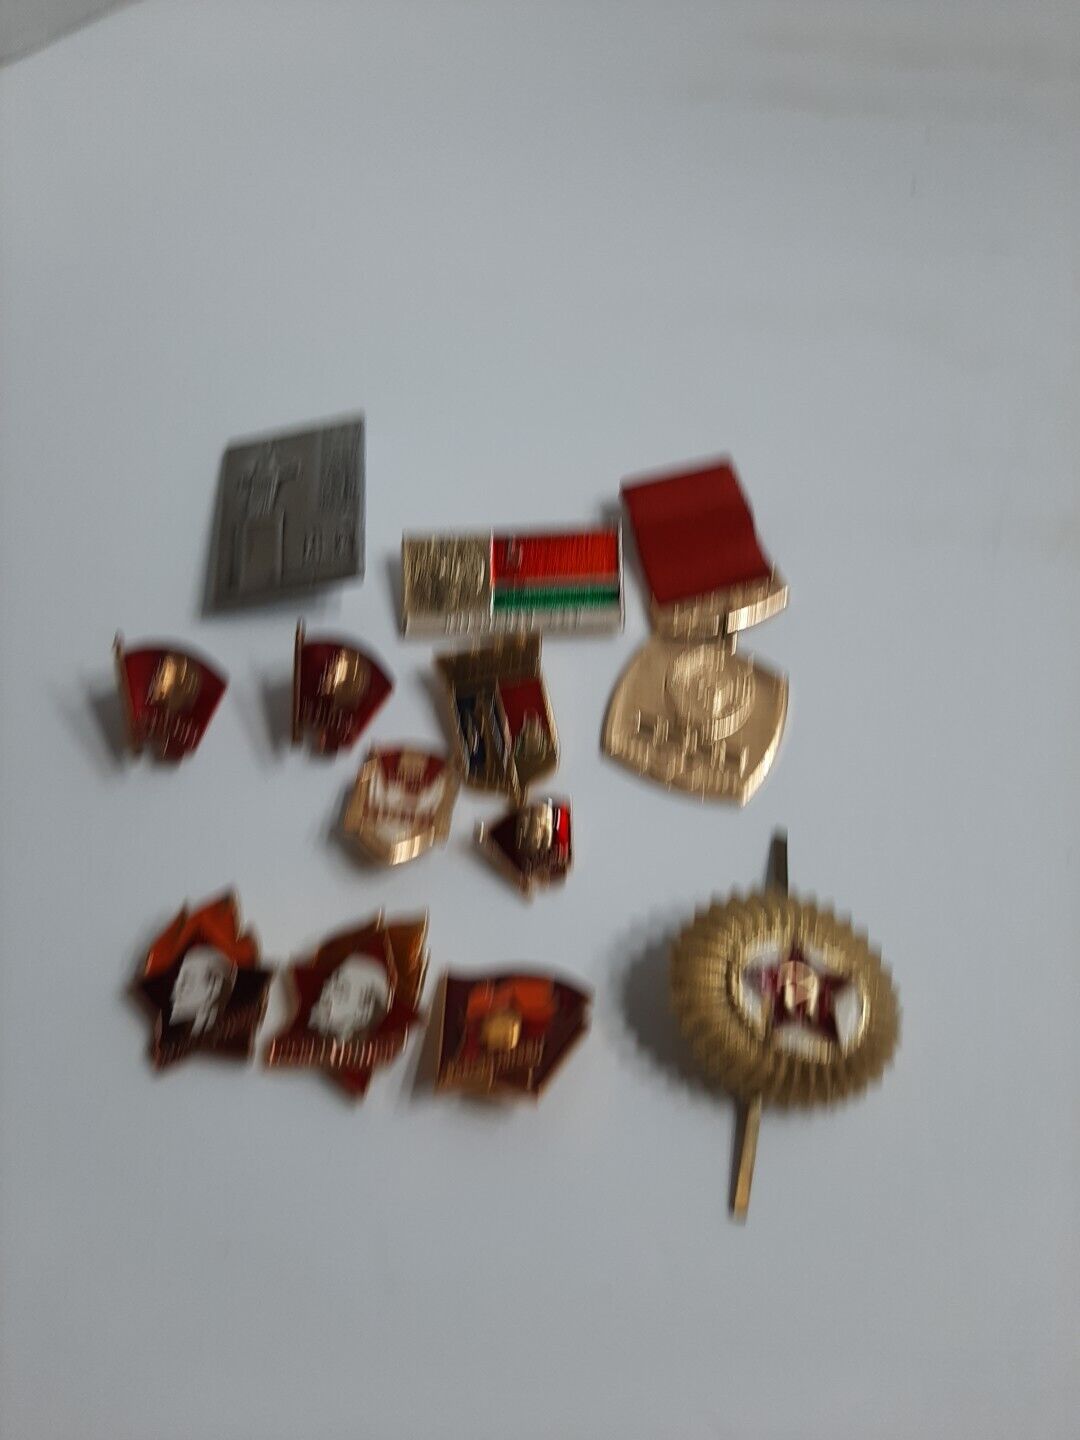 Vintage Russian Pins/Buttons #2